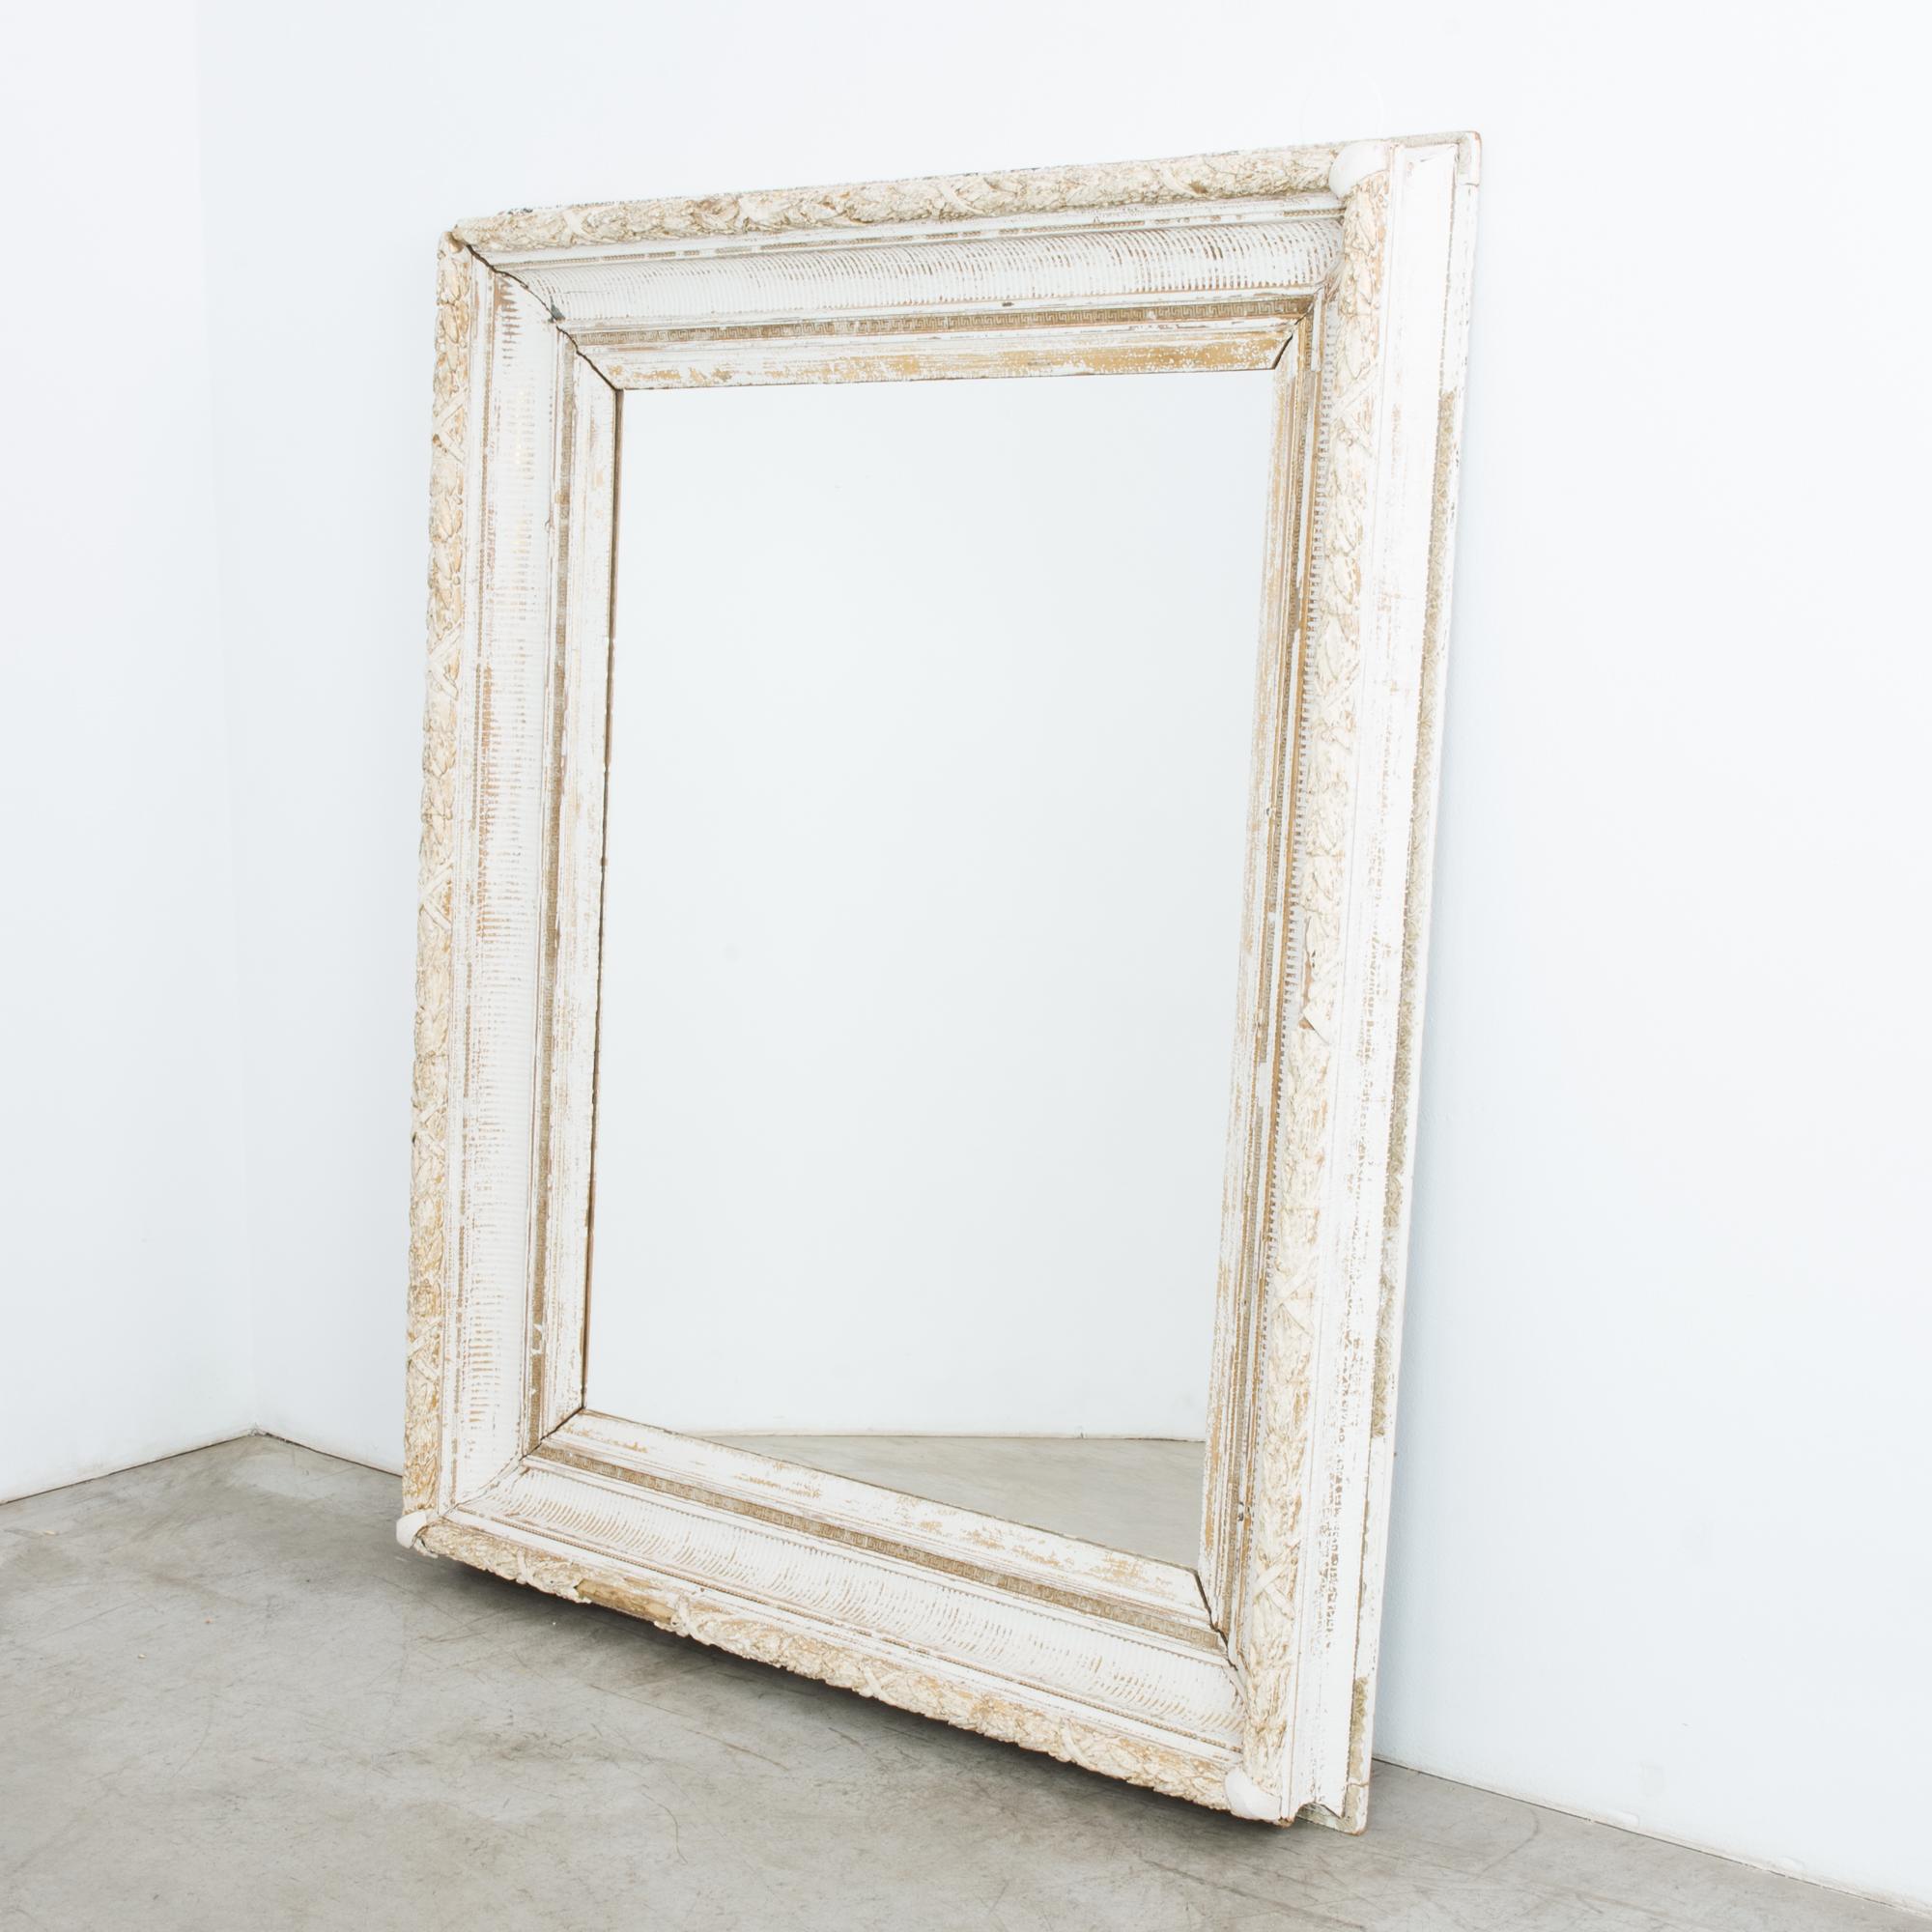 Made in France, circa 1880, this exceptional mirror with a wooden frame will be an elegant accent for any space. The different orders of ornamentation form a beautifully layered composition. The meander, reeding, and carved foliage hint at its